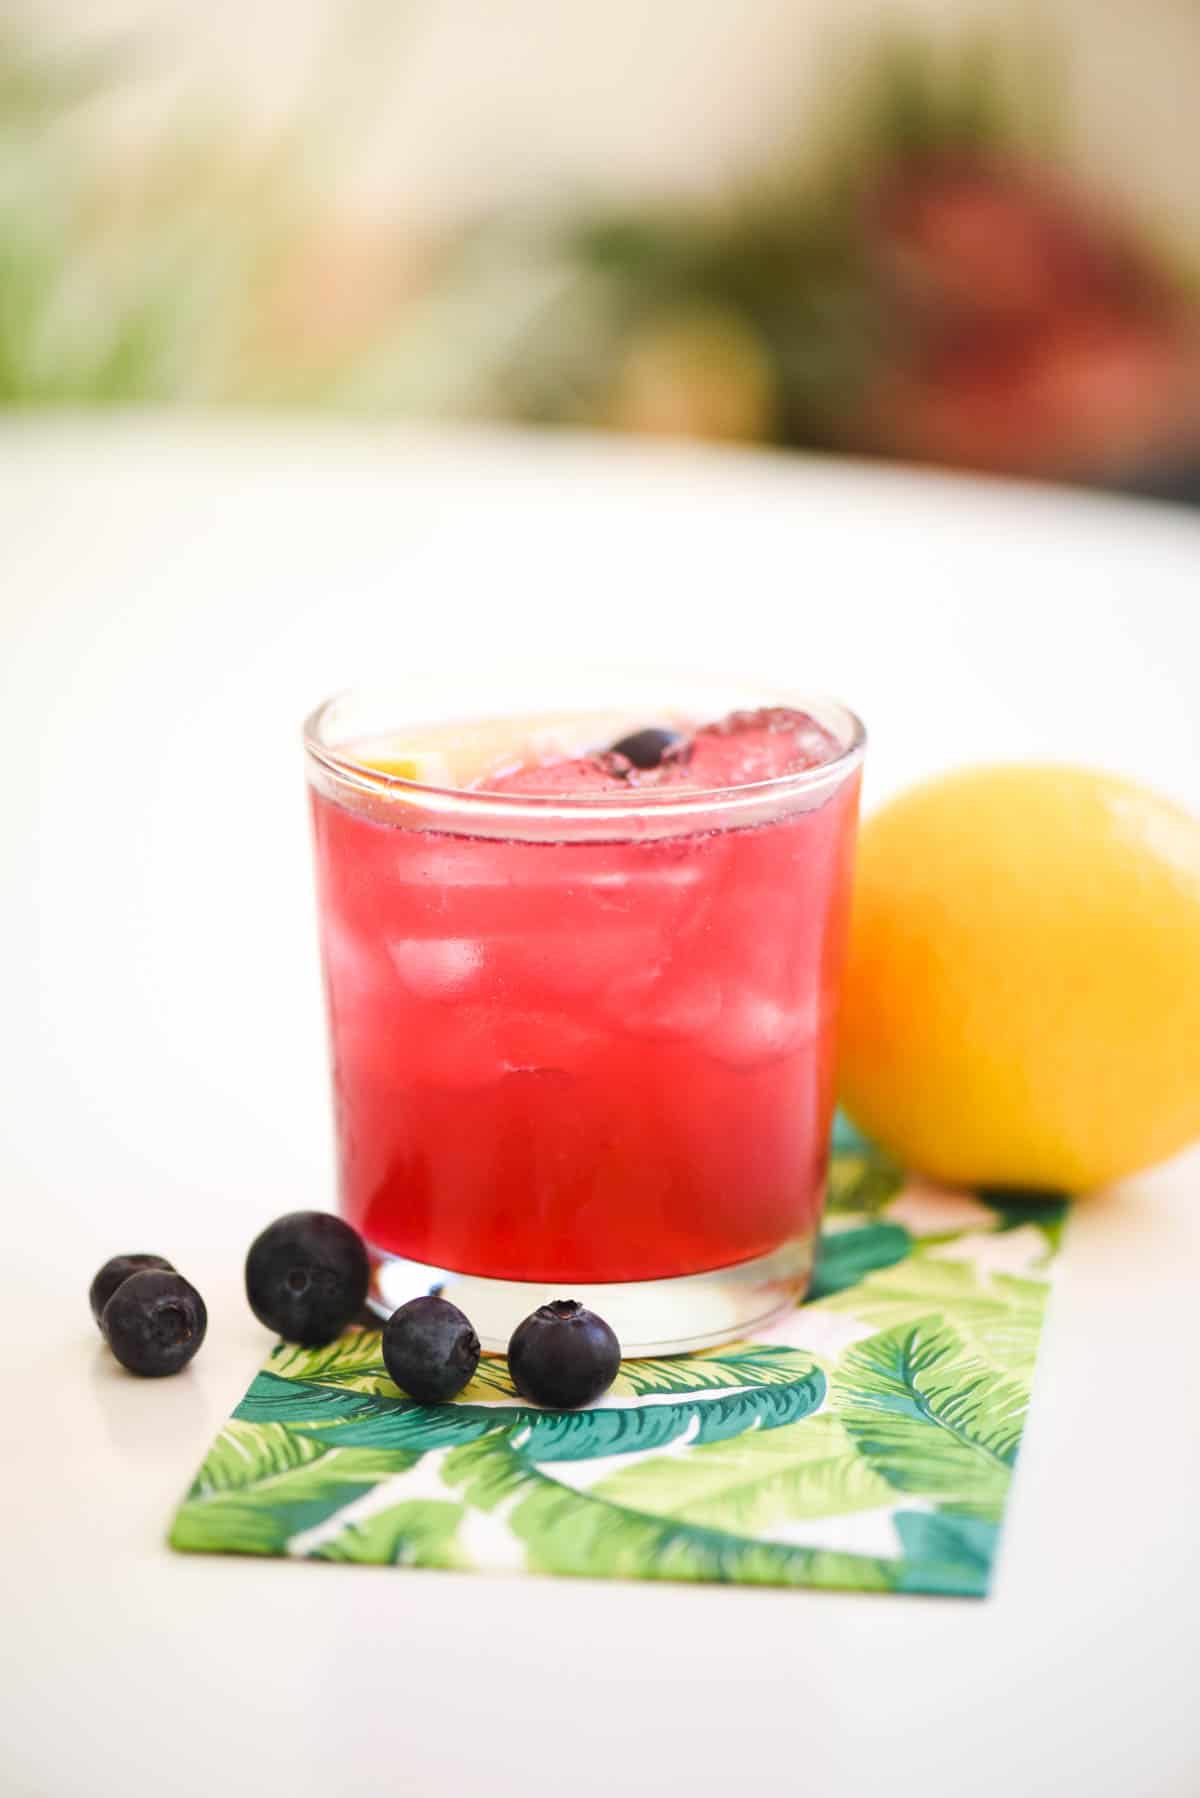 A blueberry lemonade cocktail with vodka in a high ball glass and surrounded by fresh lemon and blueberries.